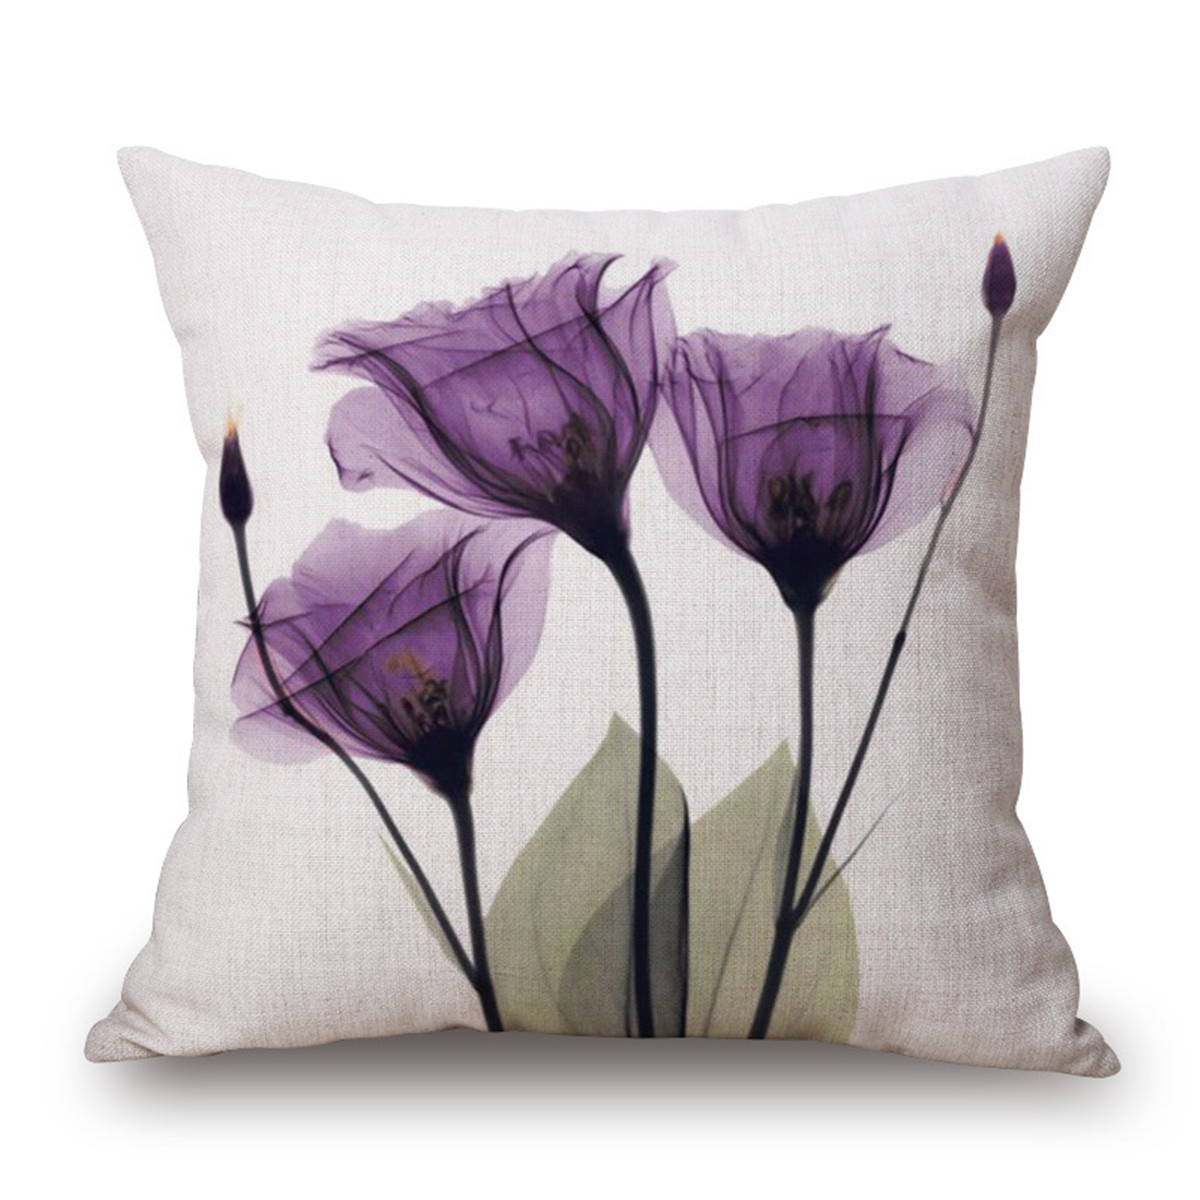 Ink-Painting-Flowers-Cotton-Linen-Pillow-Case-Tulips-Sofa-Cushion-Cover-45x45cm-1161674-4